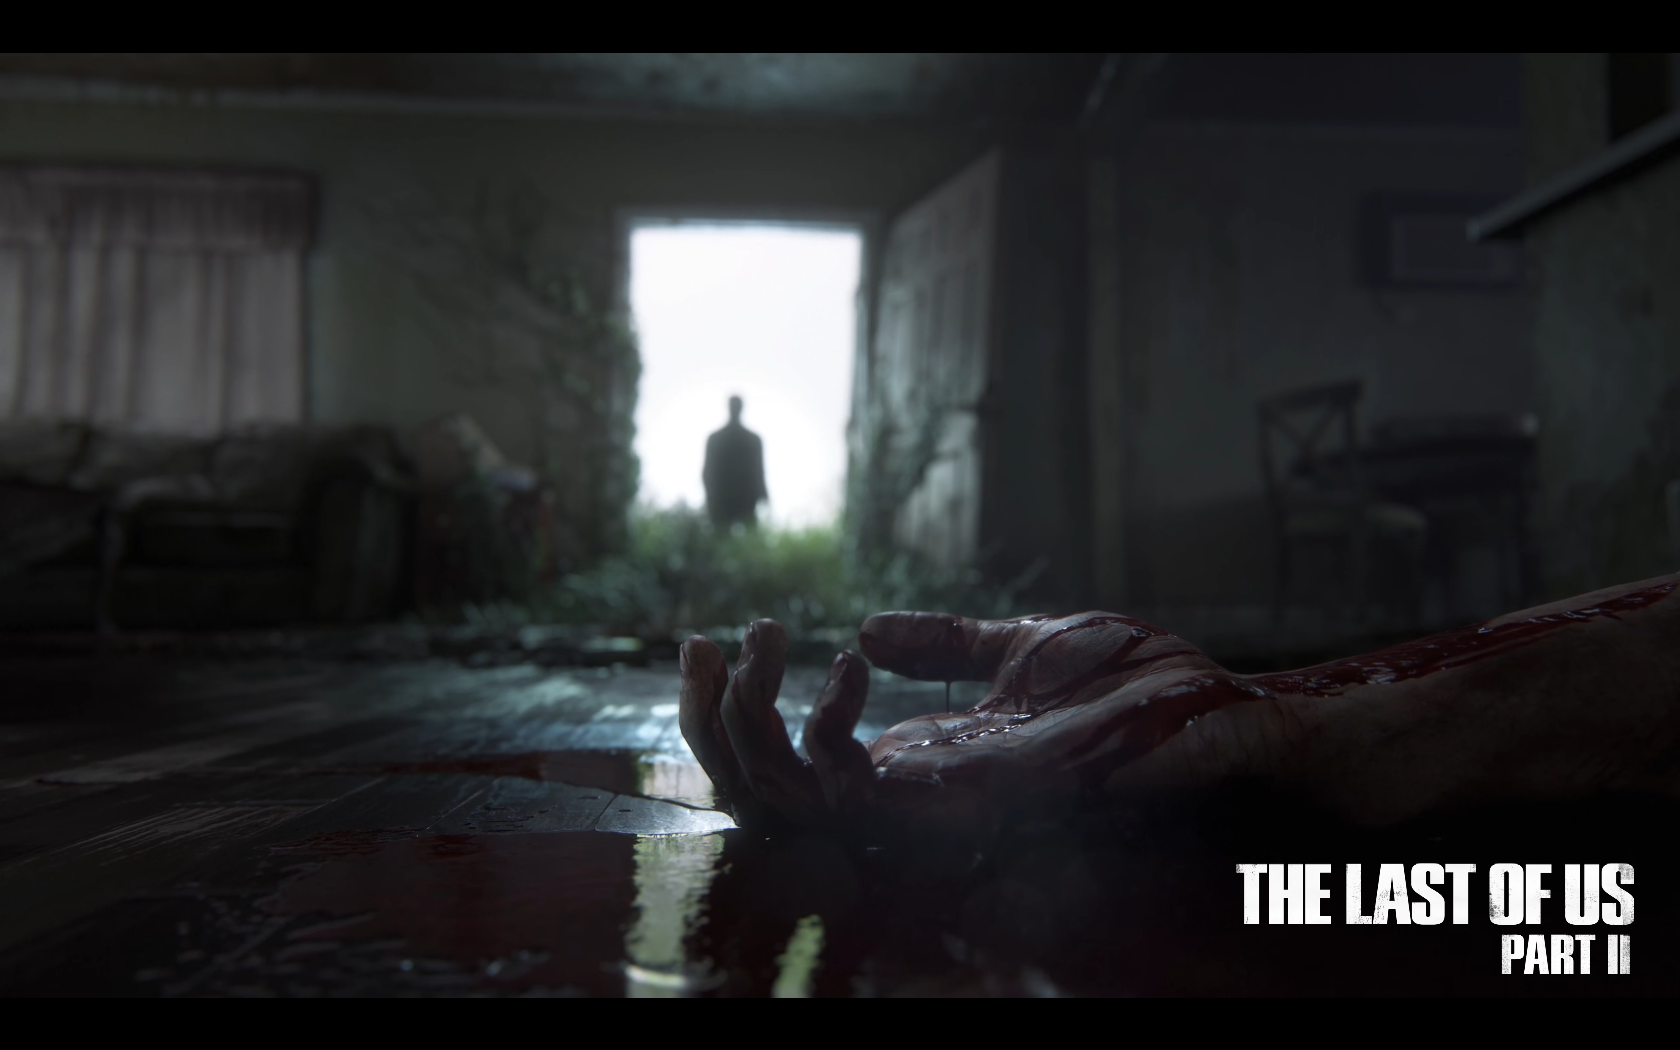 The Last of Us wallpaper by lawrenciumm